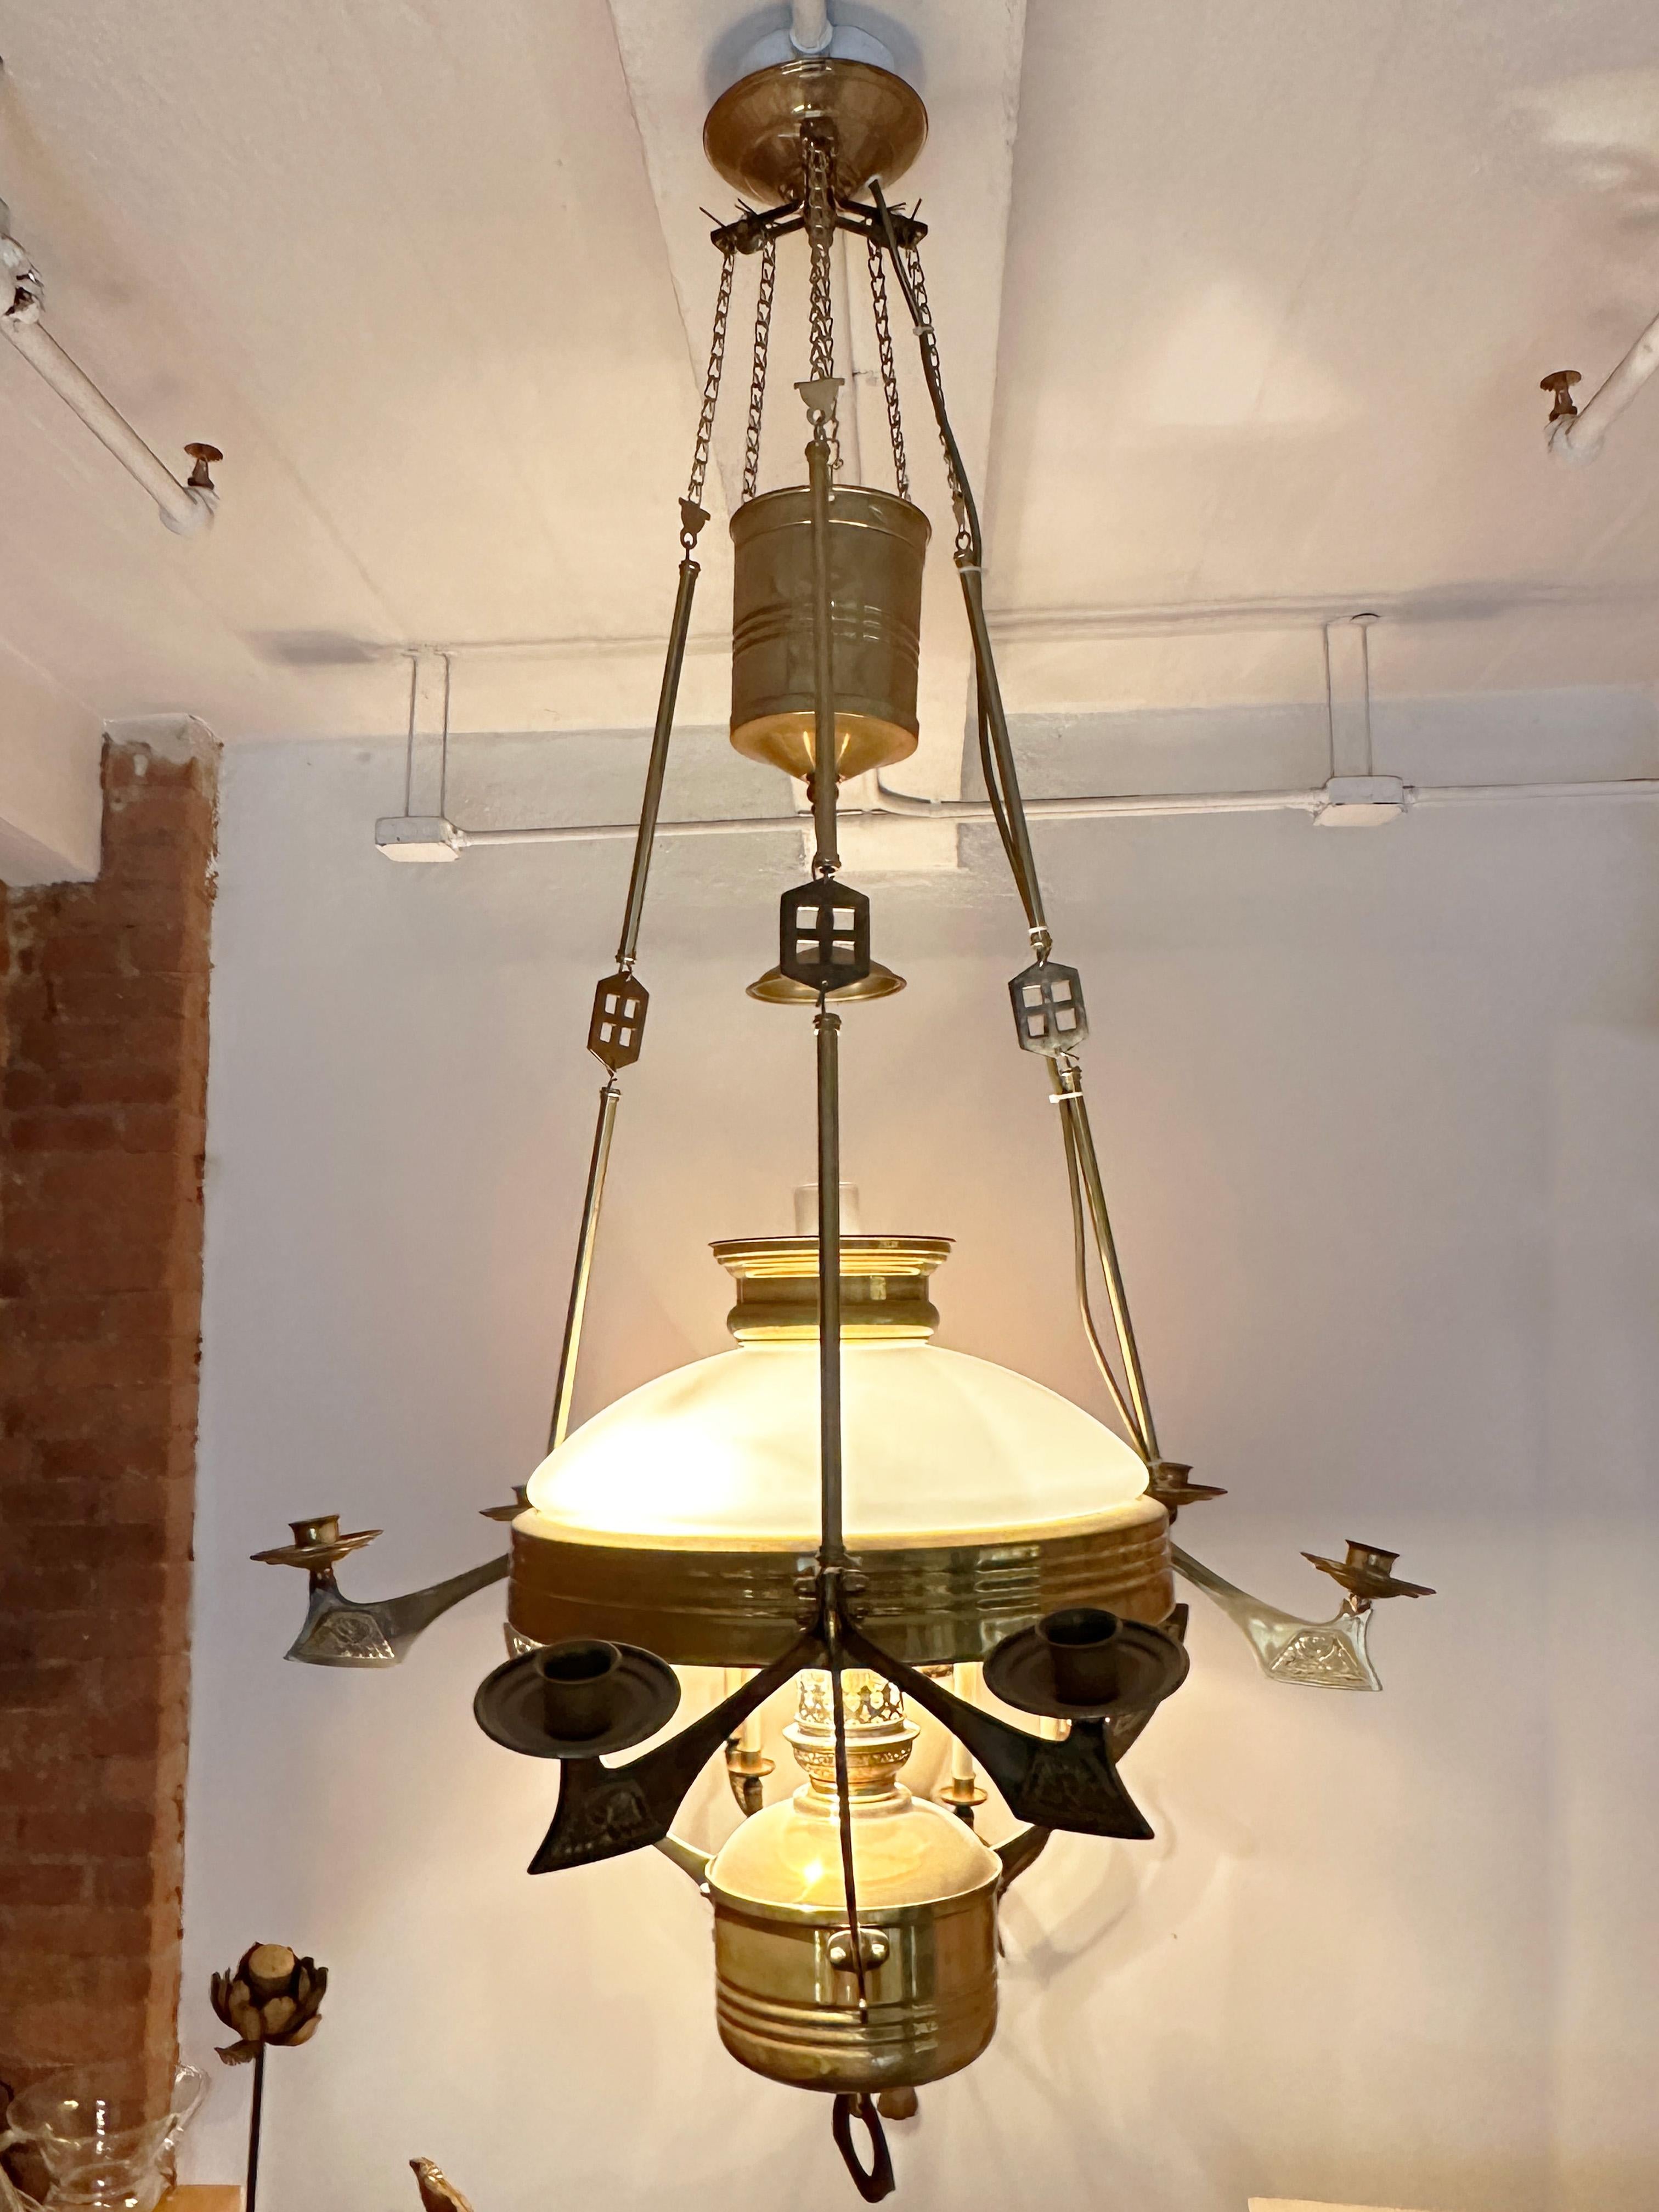 Contemporary Early 19th Century Brass and Milk Glass Sweedish Chandelier Reproduction For Sale